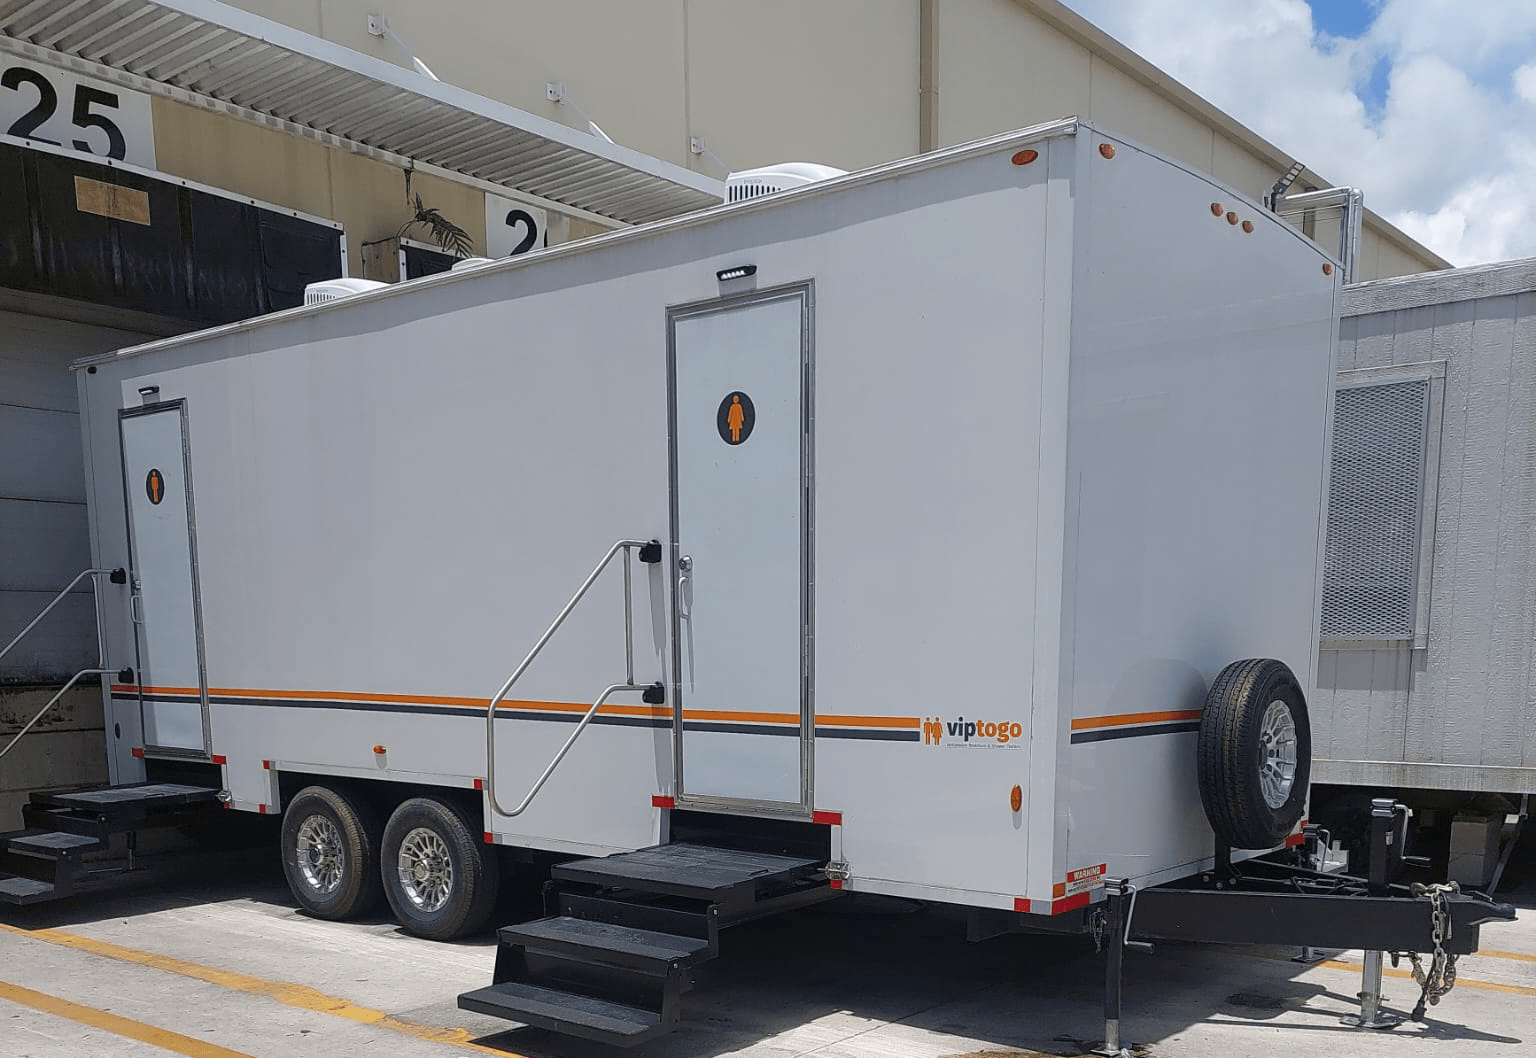 VIP To Go’s mobile restroom solutions for emergency